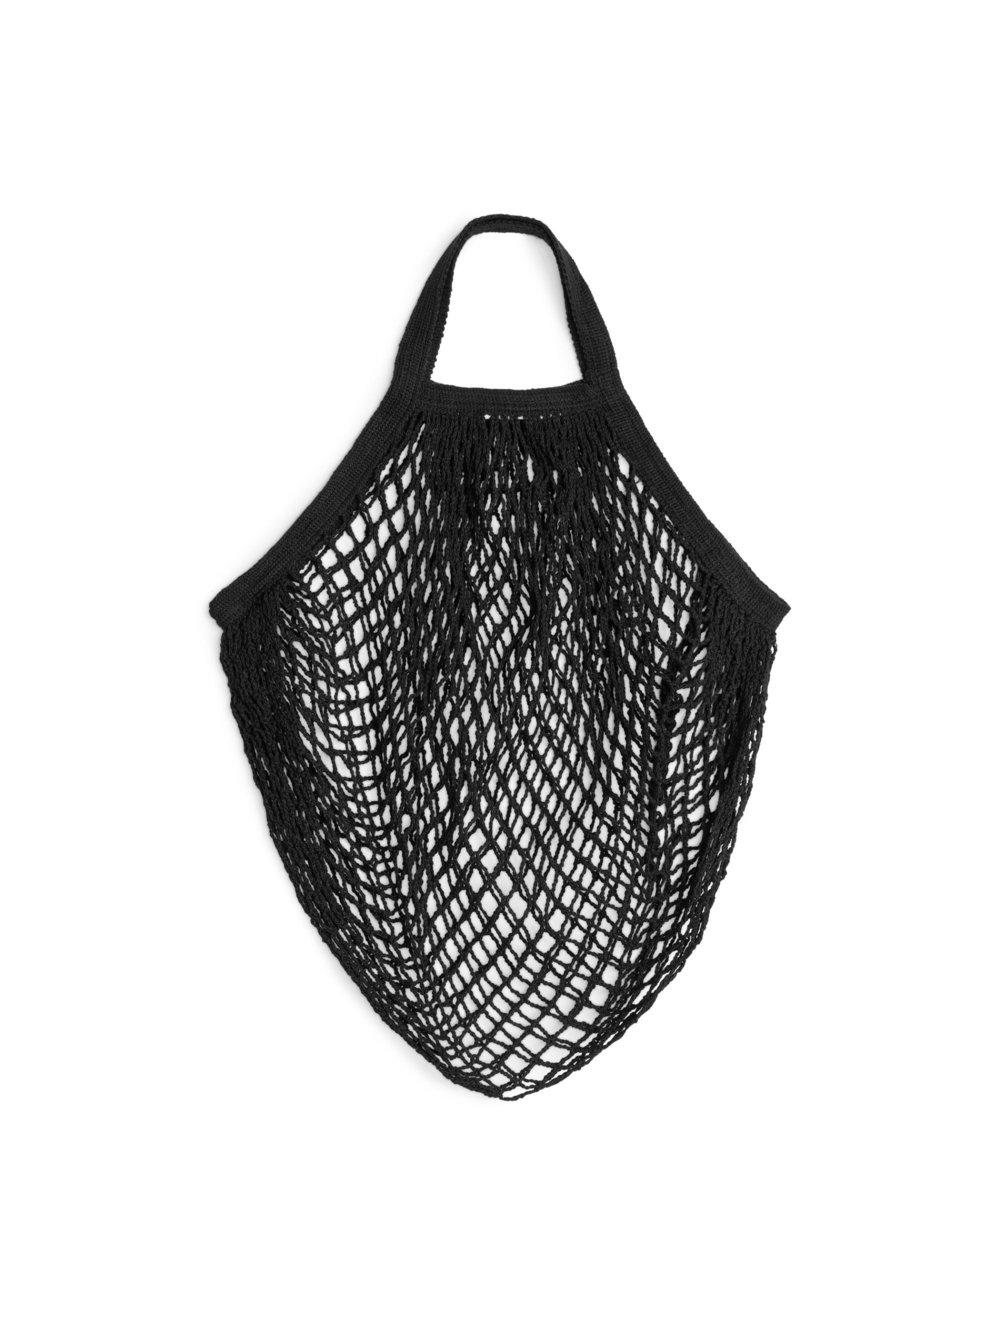 Netted turtle bags